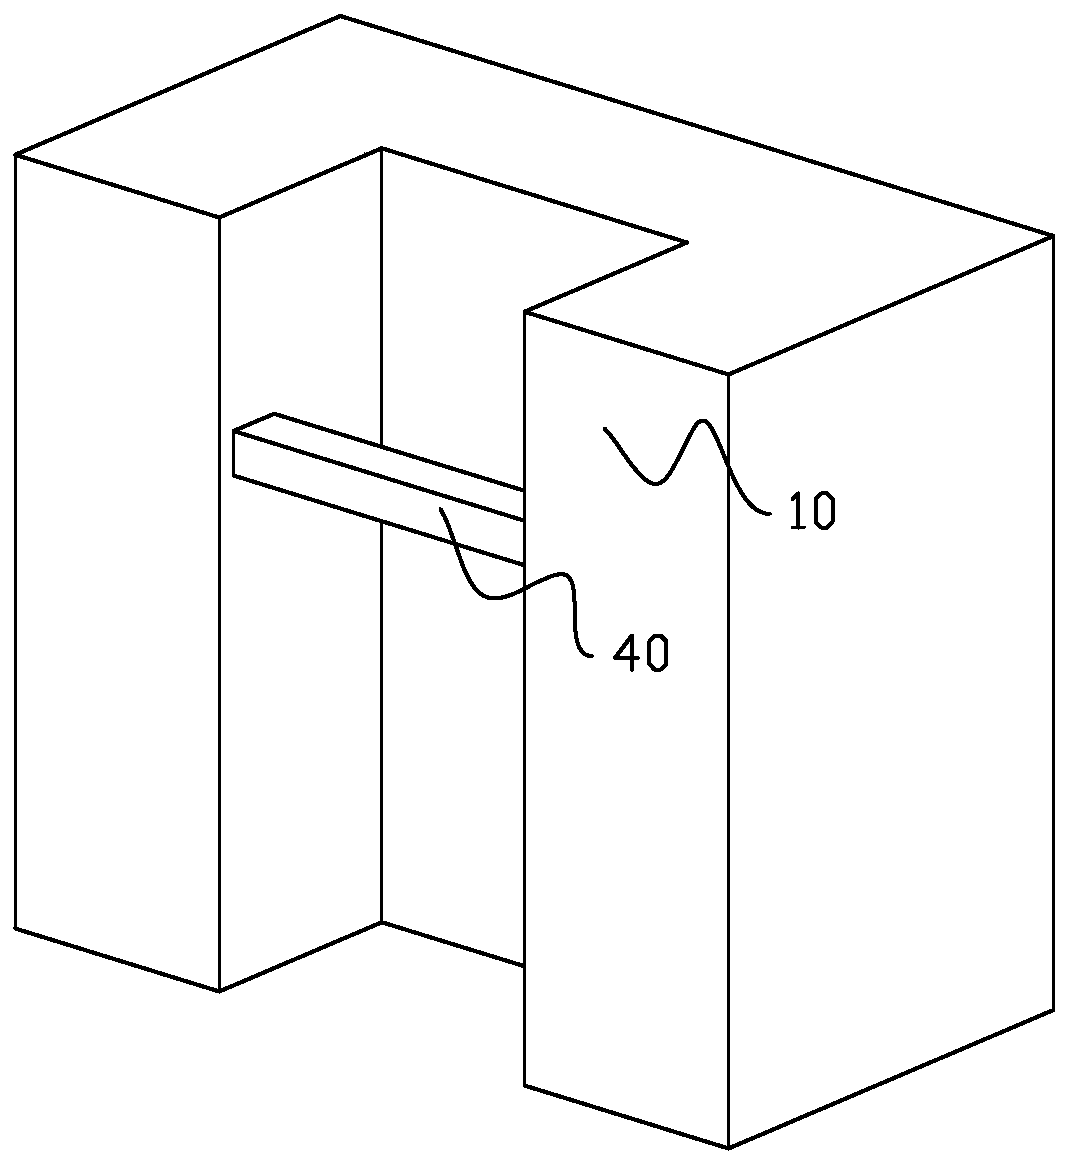 Construction method for connecting beams of super high-rise building